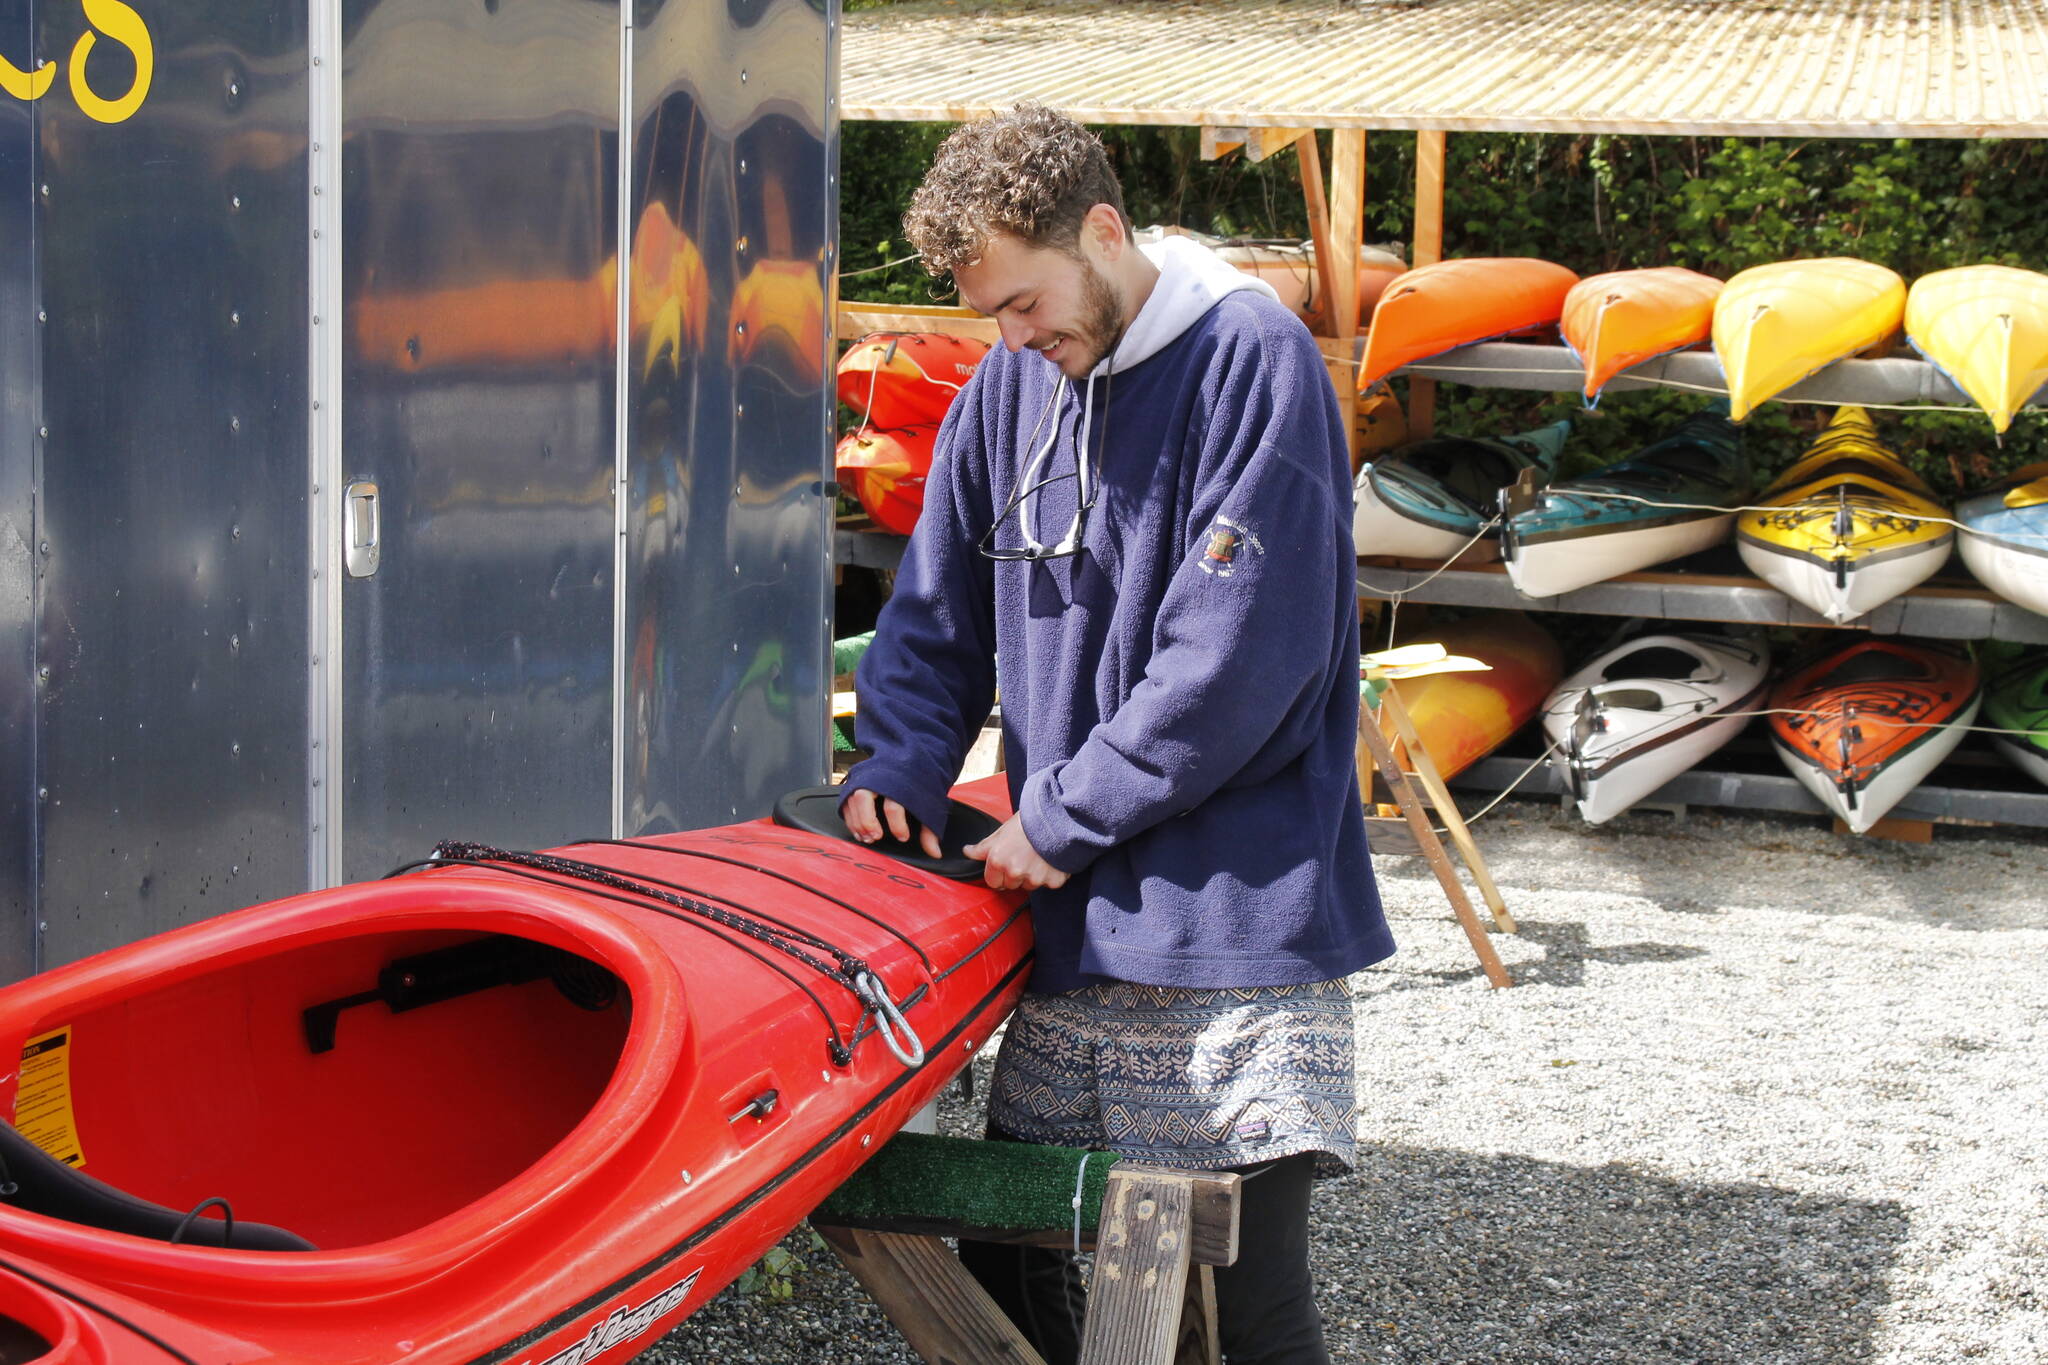 Photo by Kira Erickson/South Whidbey Record
Whidbey Island Kayaking Instructor Carter Webb readies a kayak for paddling.